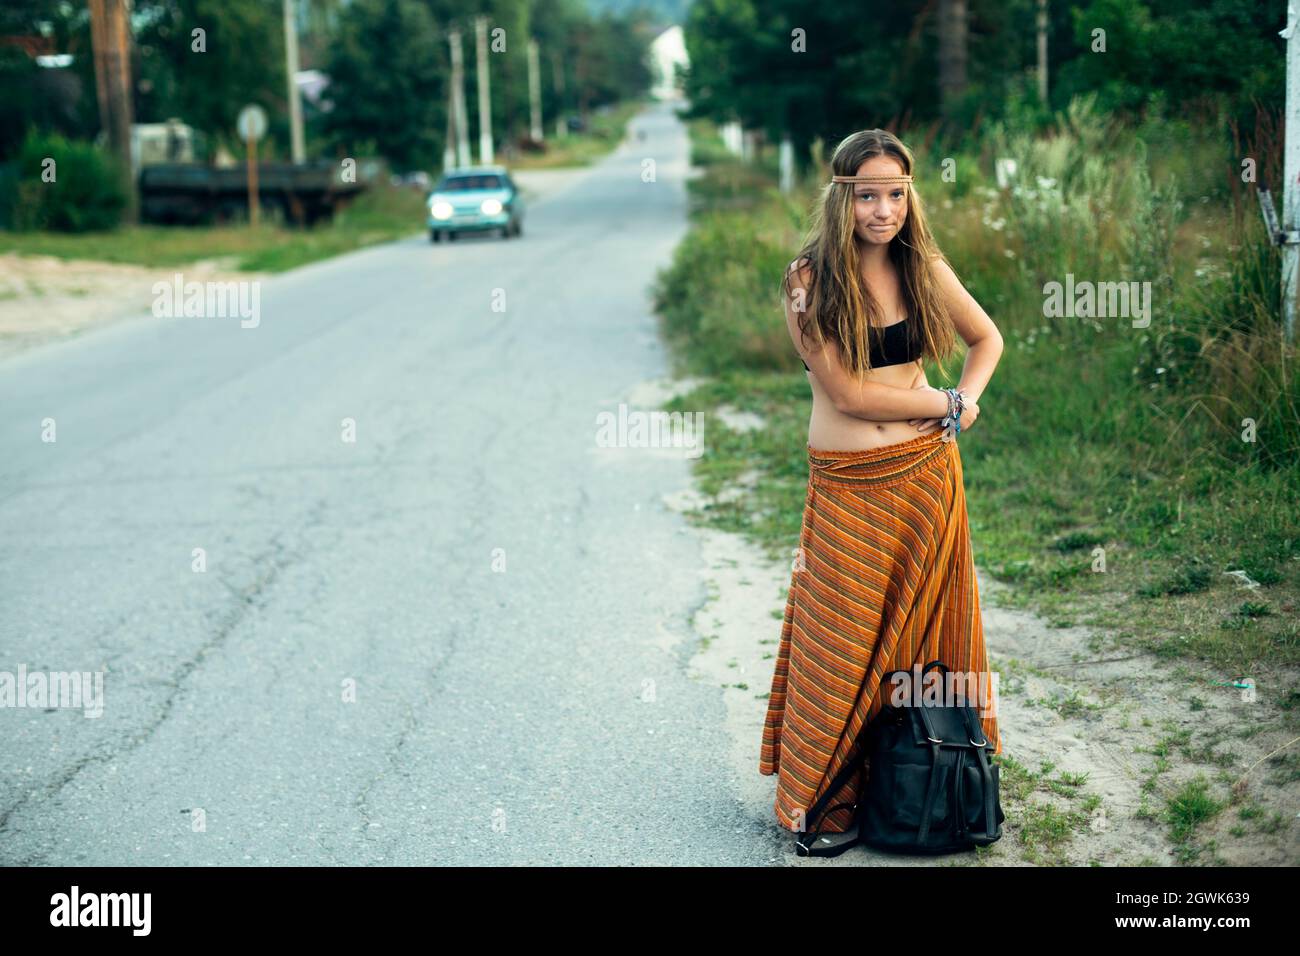 A hippie girl voting near the road. Hitchhiking trips. Stock Photo